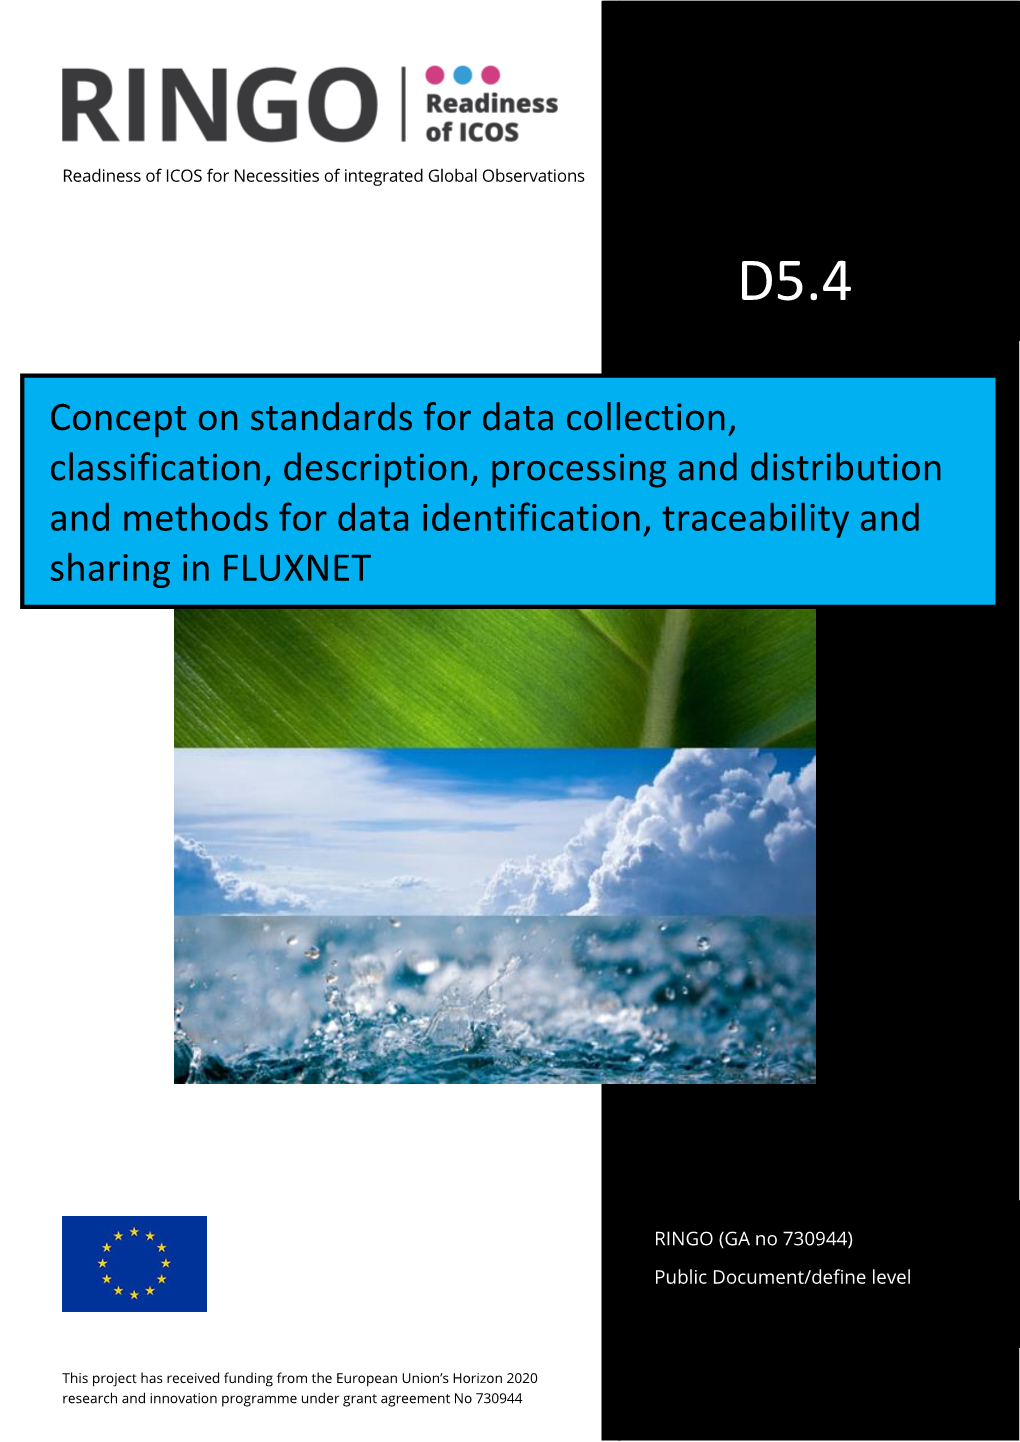 Concept on Standards for Data Collection, Classification, Description, Processing and Distribution and Methods for Data Identifi